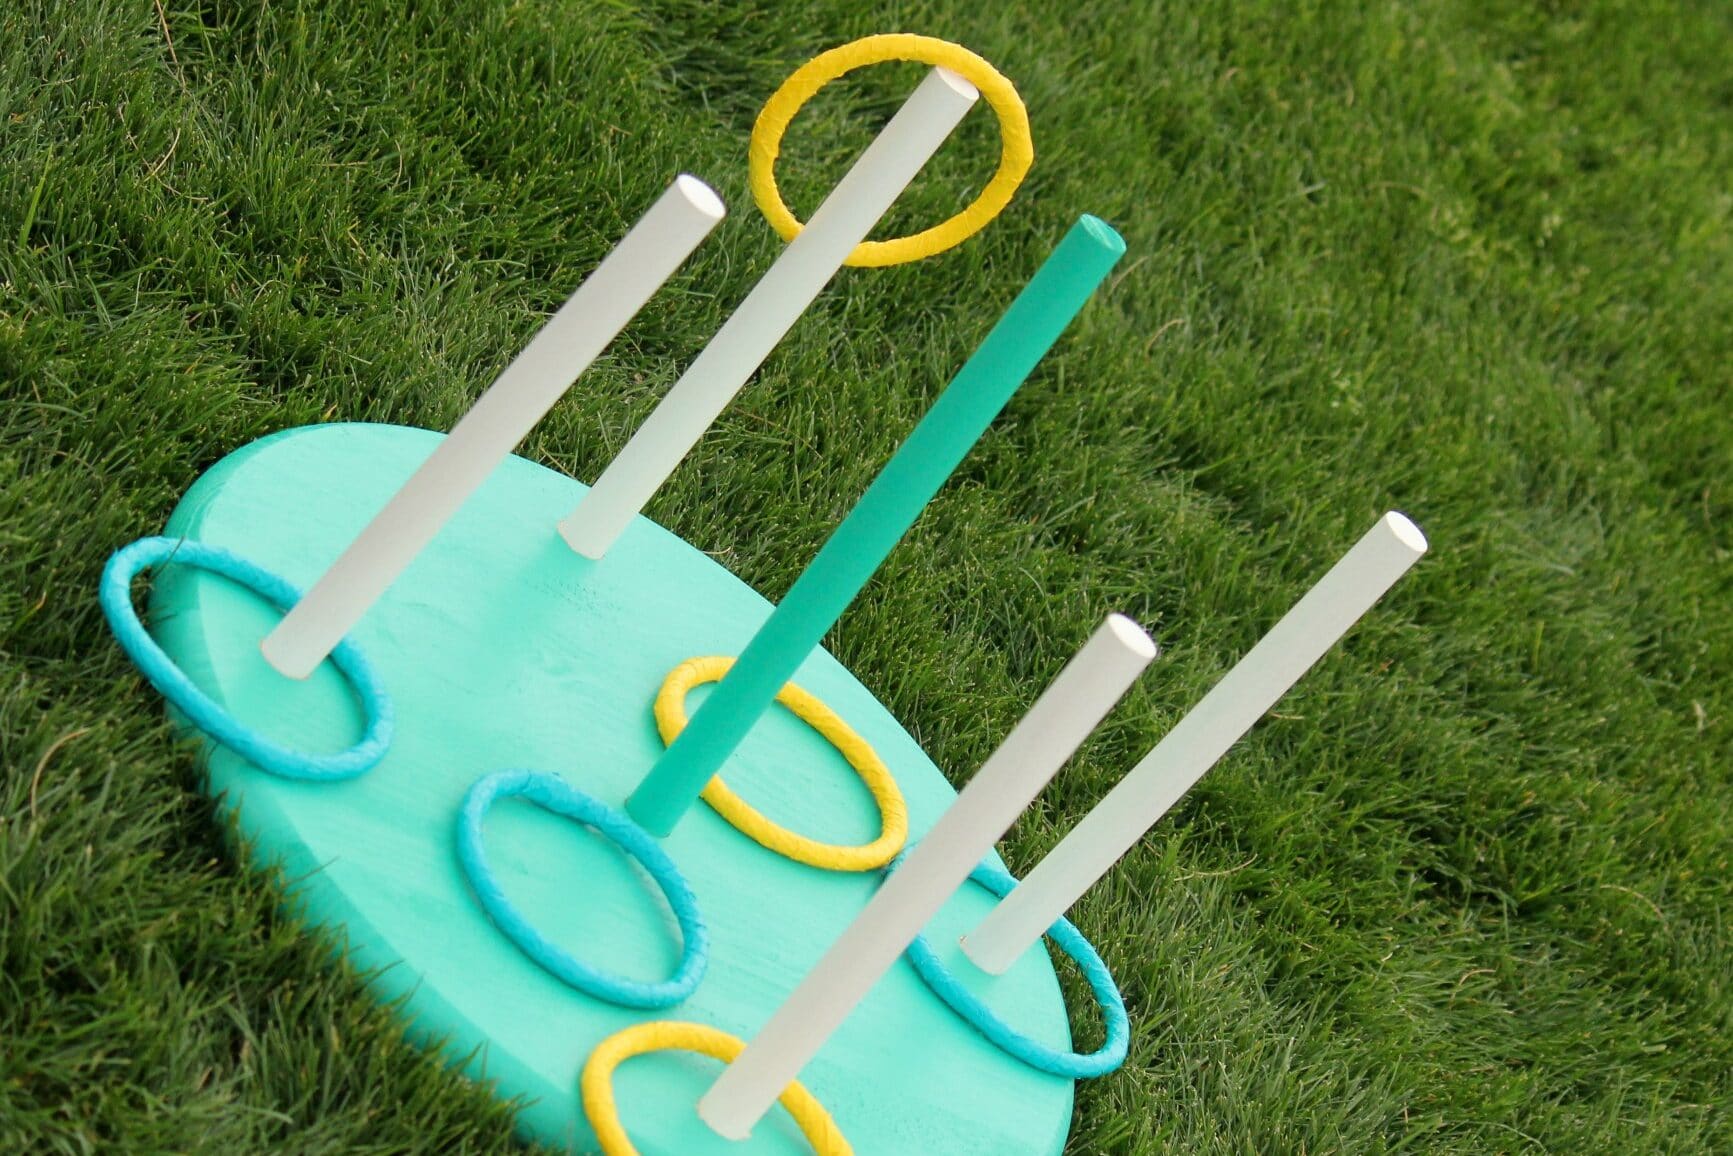 A backyard game set used to play Ring Toss | The Dating Divas